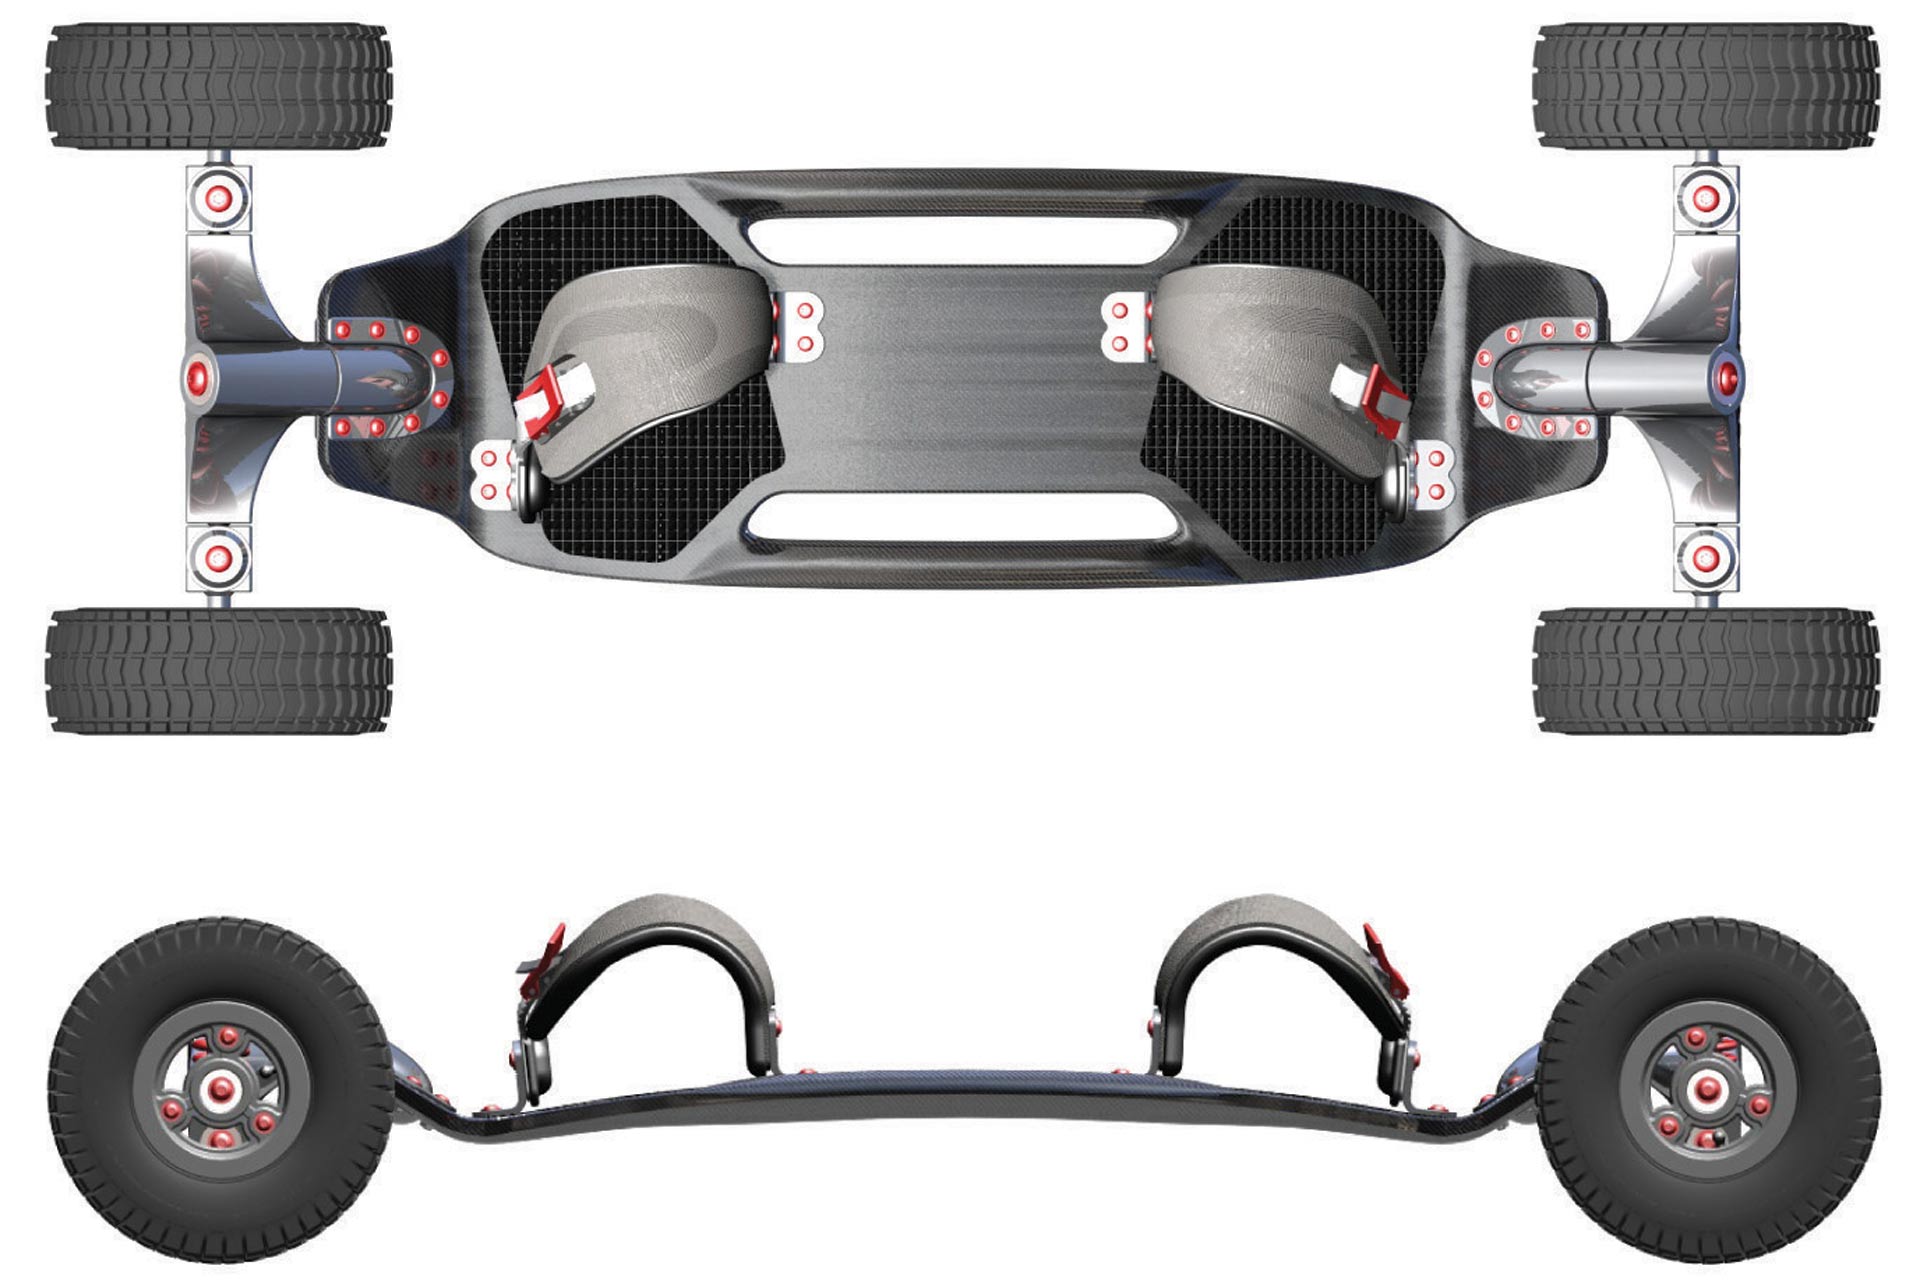 A mountainboard CAD model